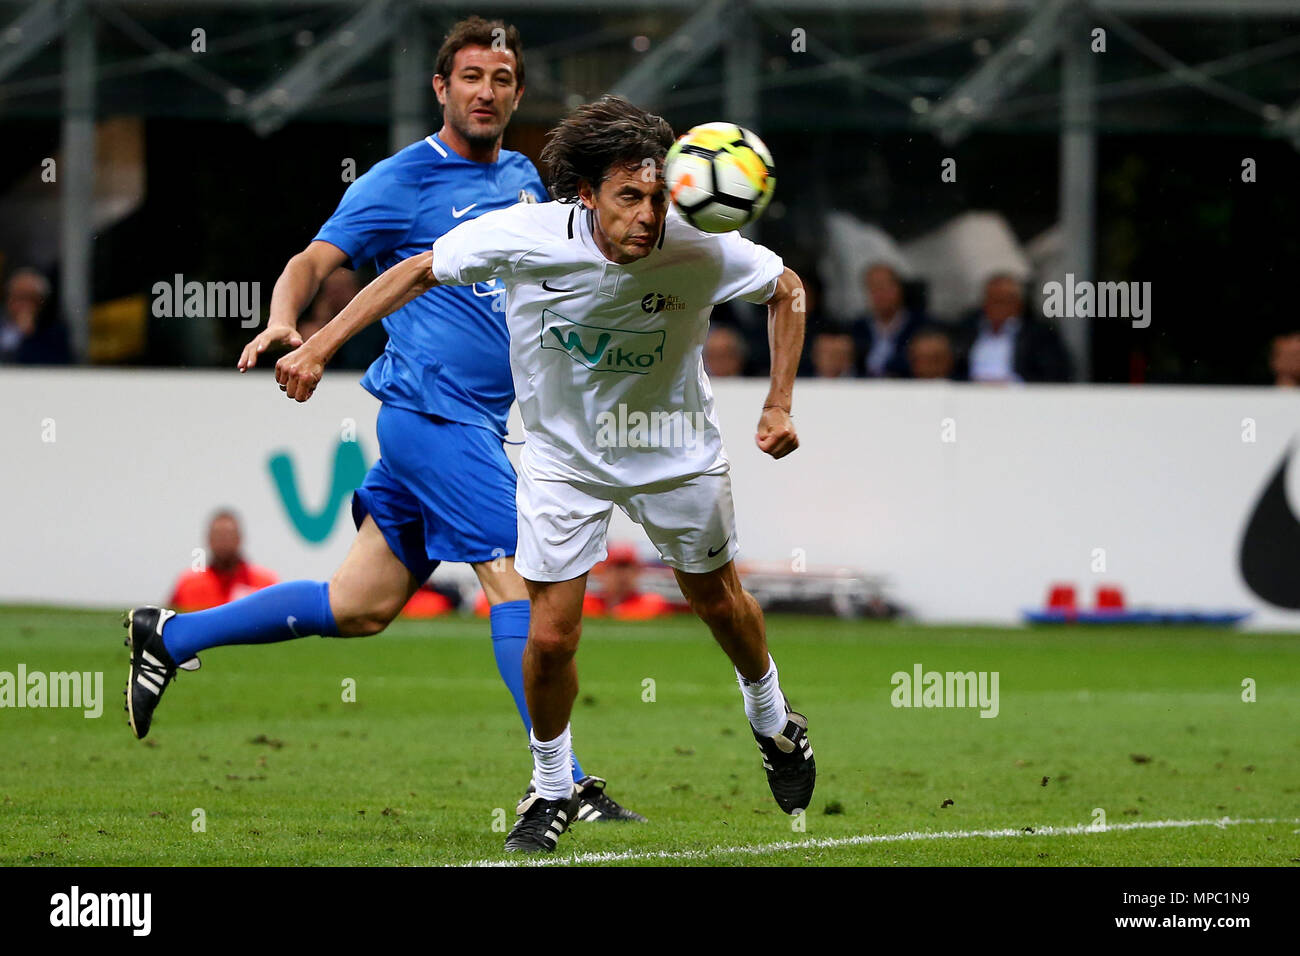 Turin, Italy. 19th May, 2018. football, SAN SIRO andREA PIRLO 21 farewell part 21 21-201-2018 in the picture: PIPPO INZAGHI SIGNS Credit: Independent Photo Agency/Alamy Live News Stock Photo